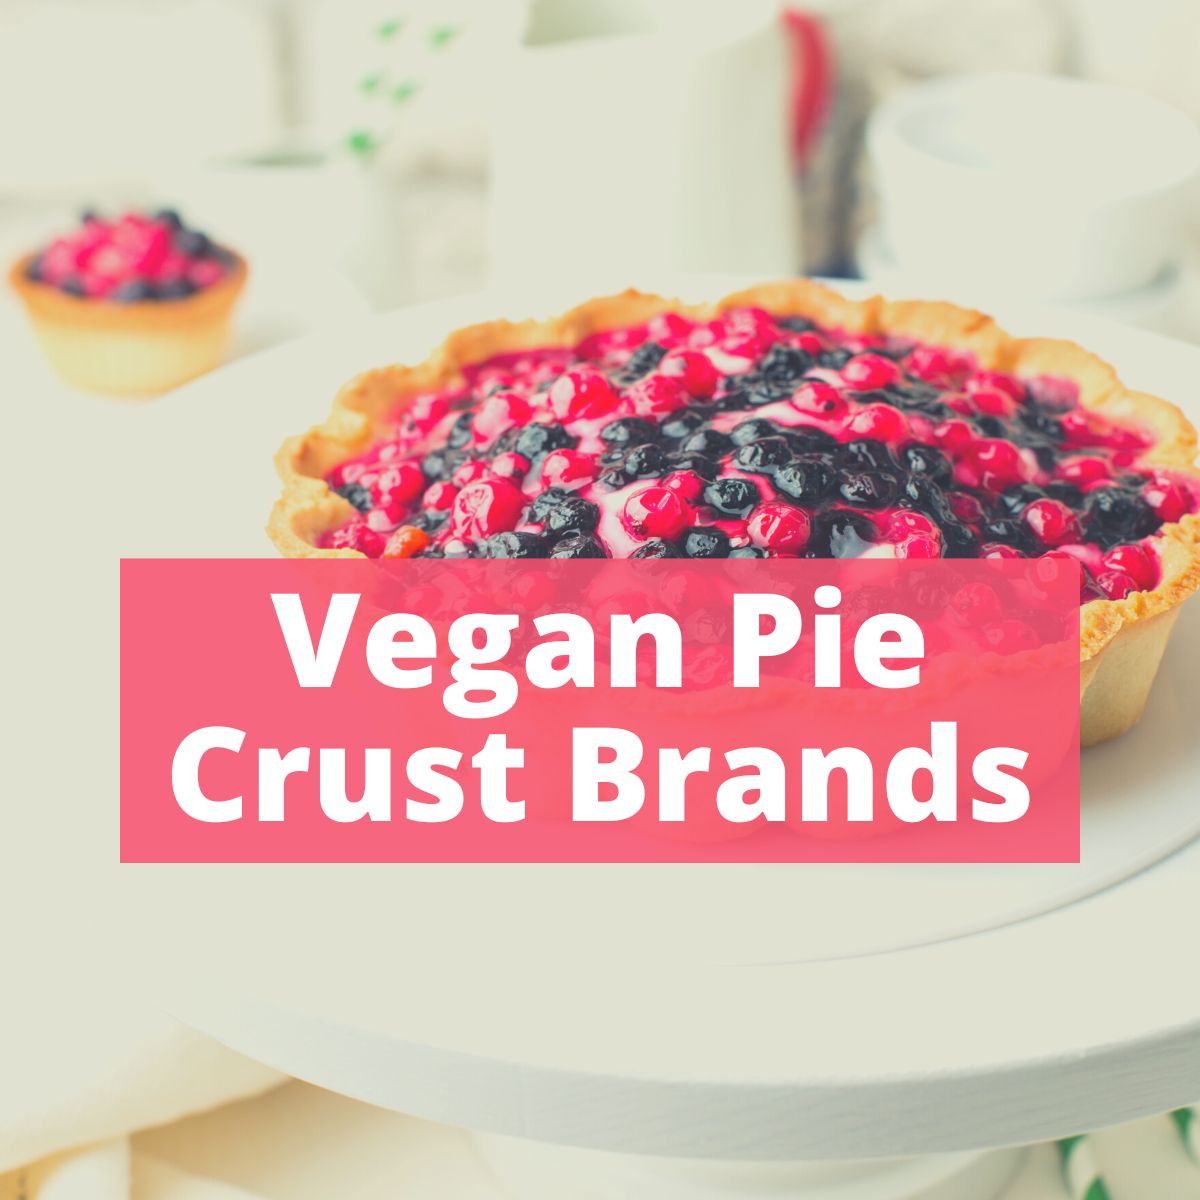 A berry pie with text overlay that says Vegan Pie Crust Brands.